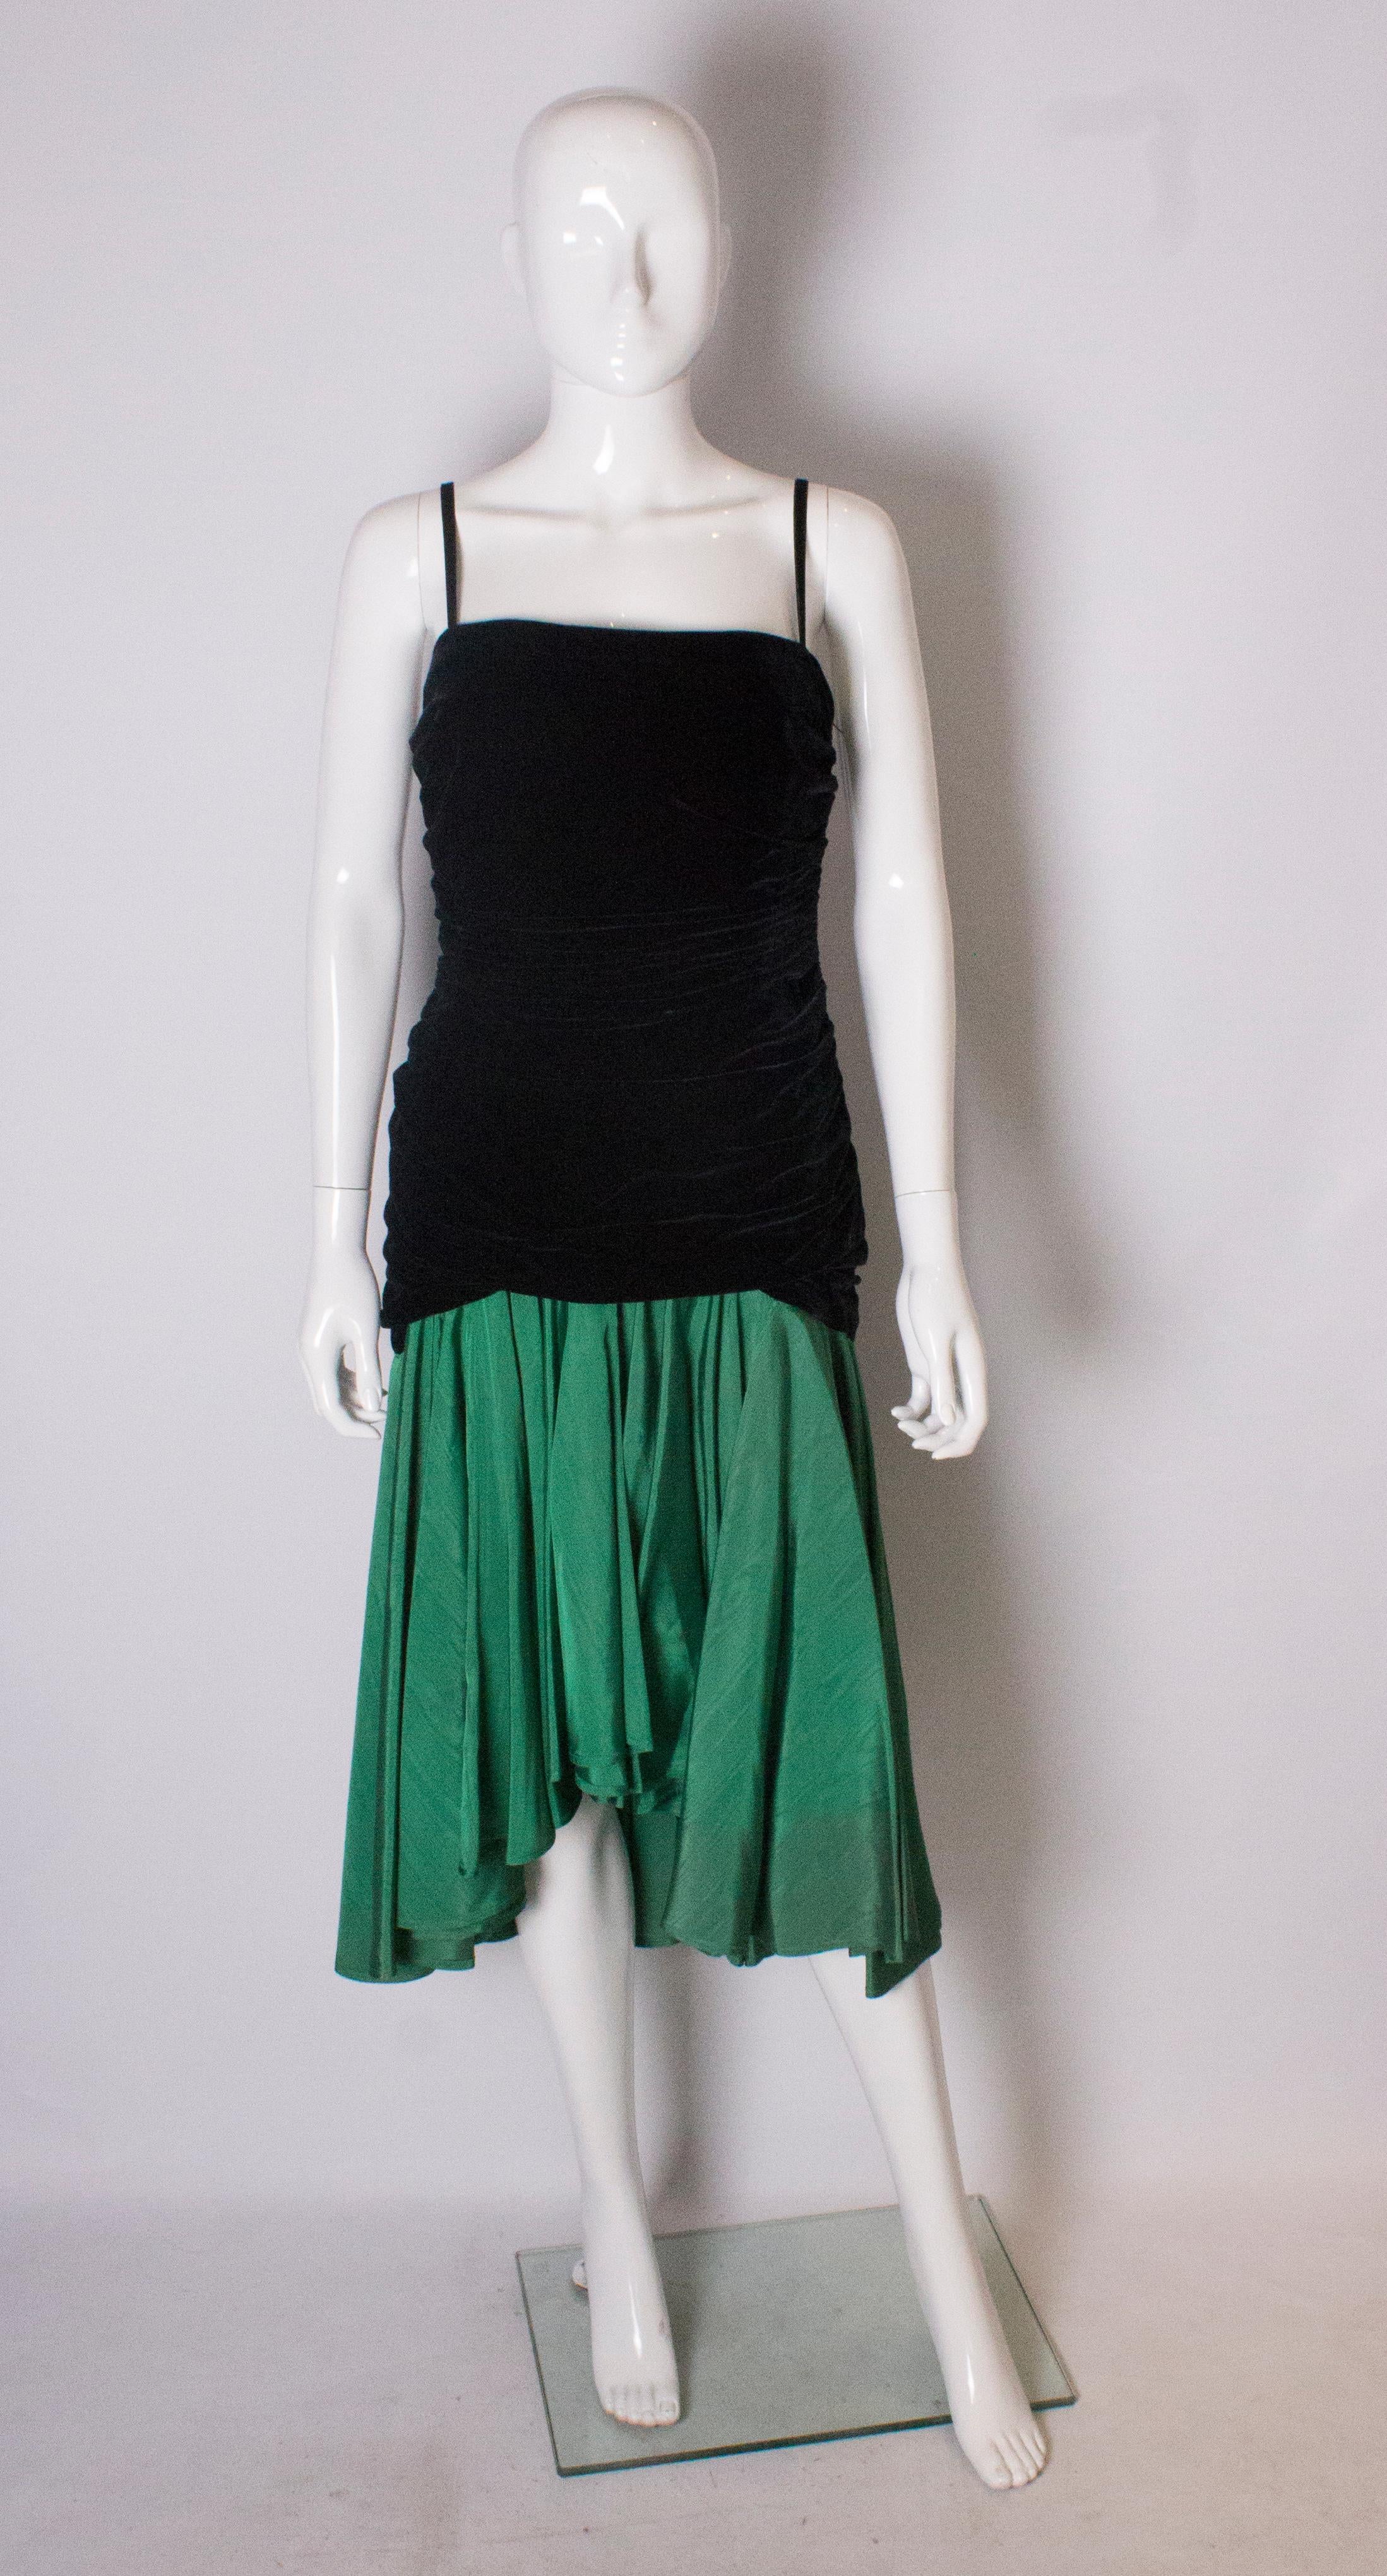 A chic vintage dress by Mimminia of Italy.  The dress has a black velvet bodice with spaghetti straps, and a side zip. It has a drop waist , and a skirt in green moire silk.